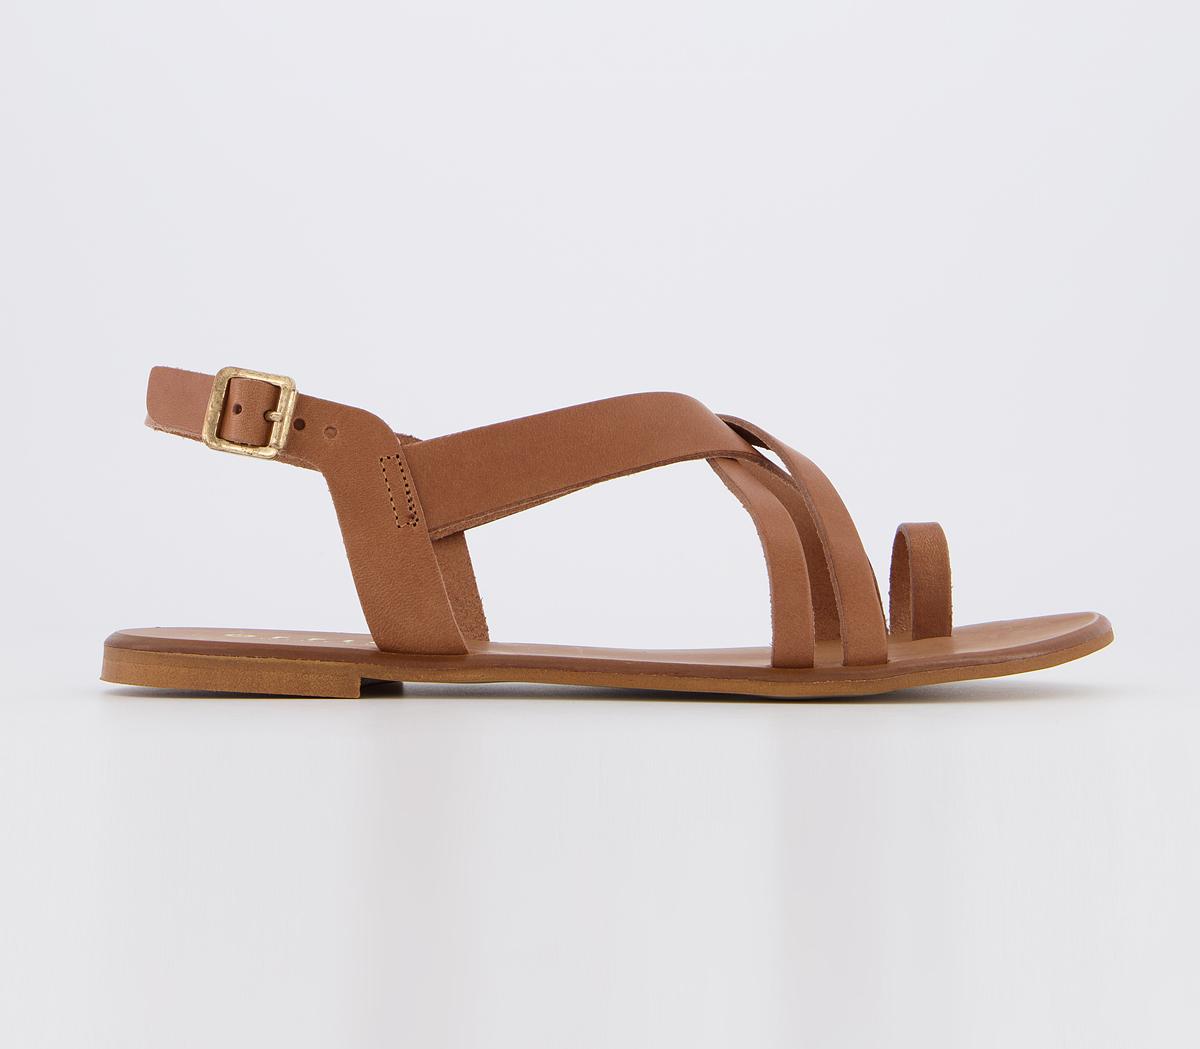 OFFICE Serious Tan Toe Loop Sandals Tan Leather - Women’s Sandals